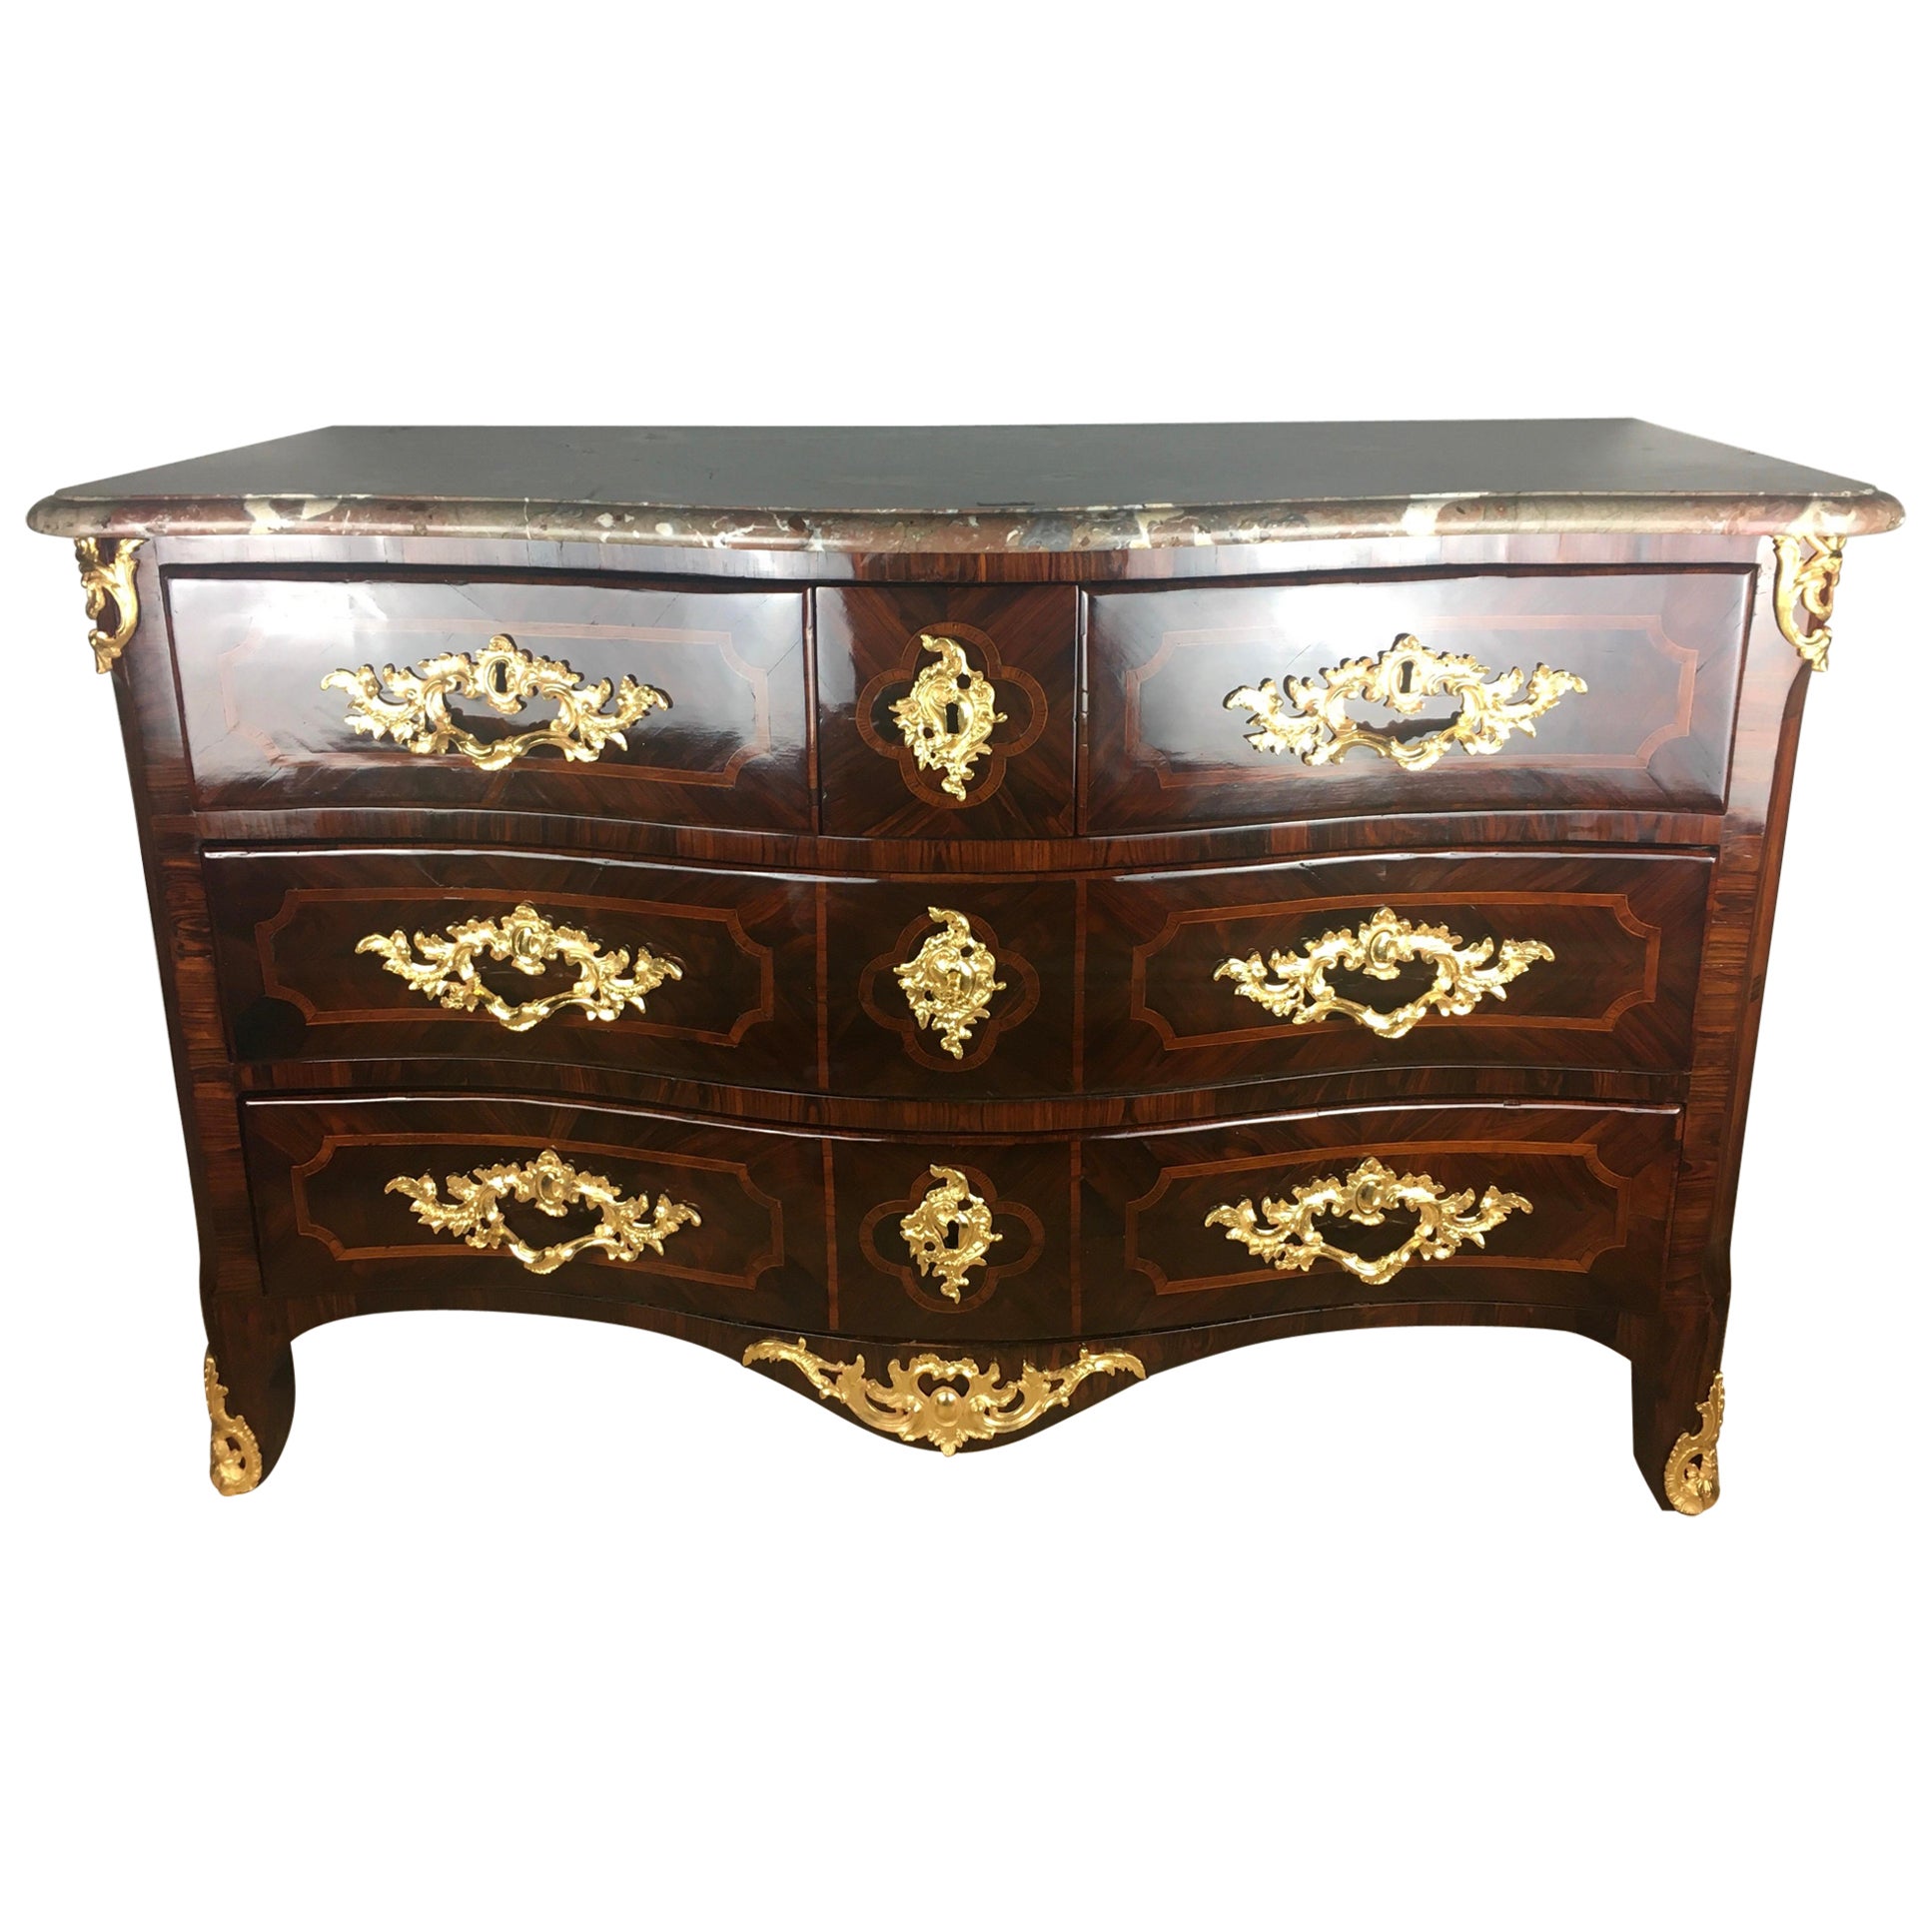 18th Century Louis XV Style Ormolu Mounted Bronze Bombe Commode by G. Przirembel For Sale